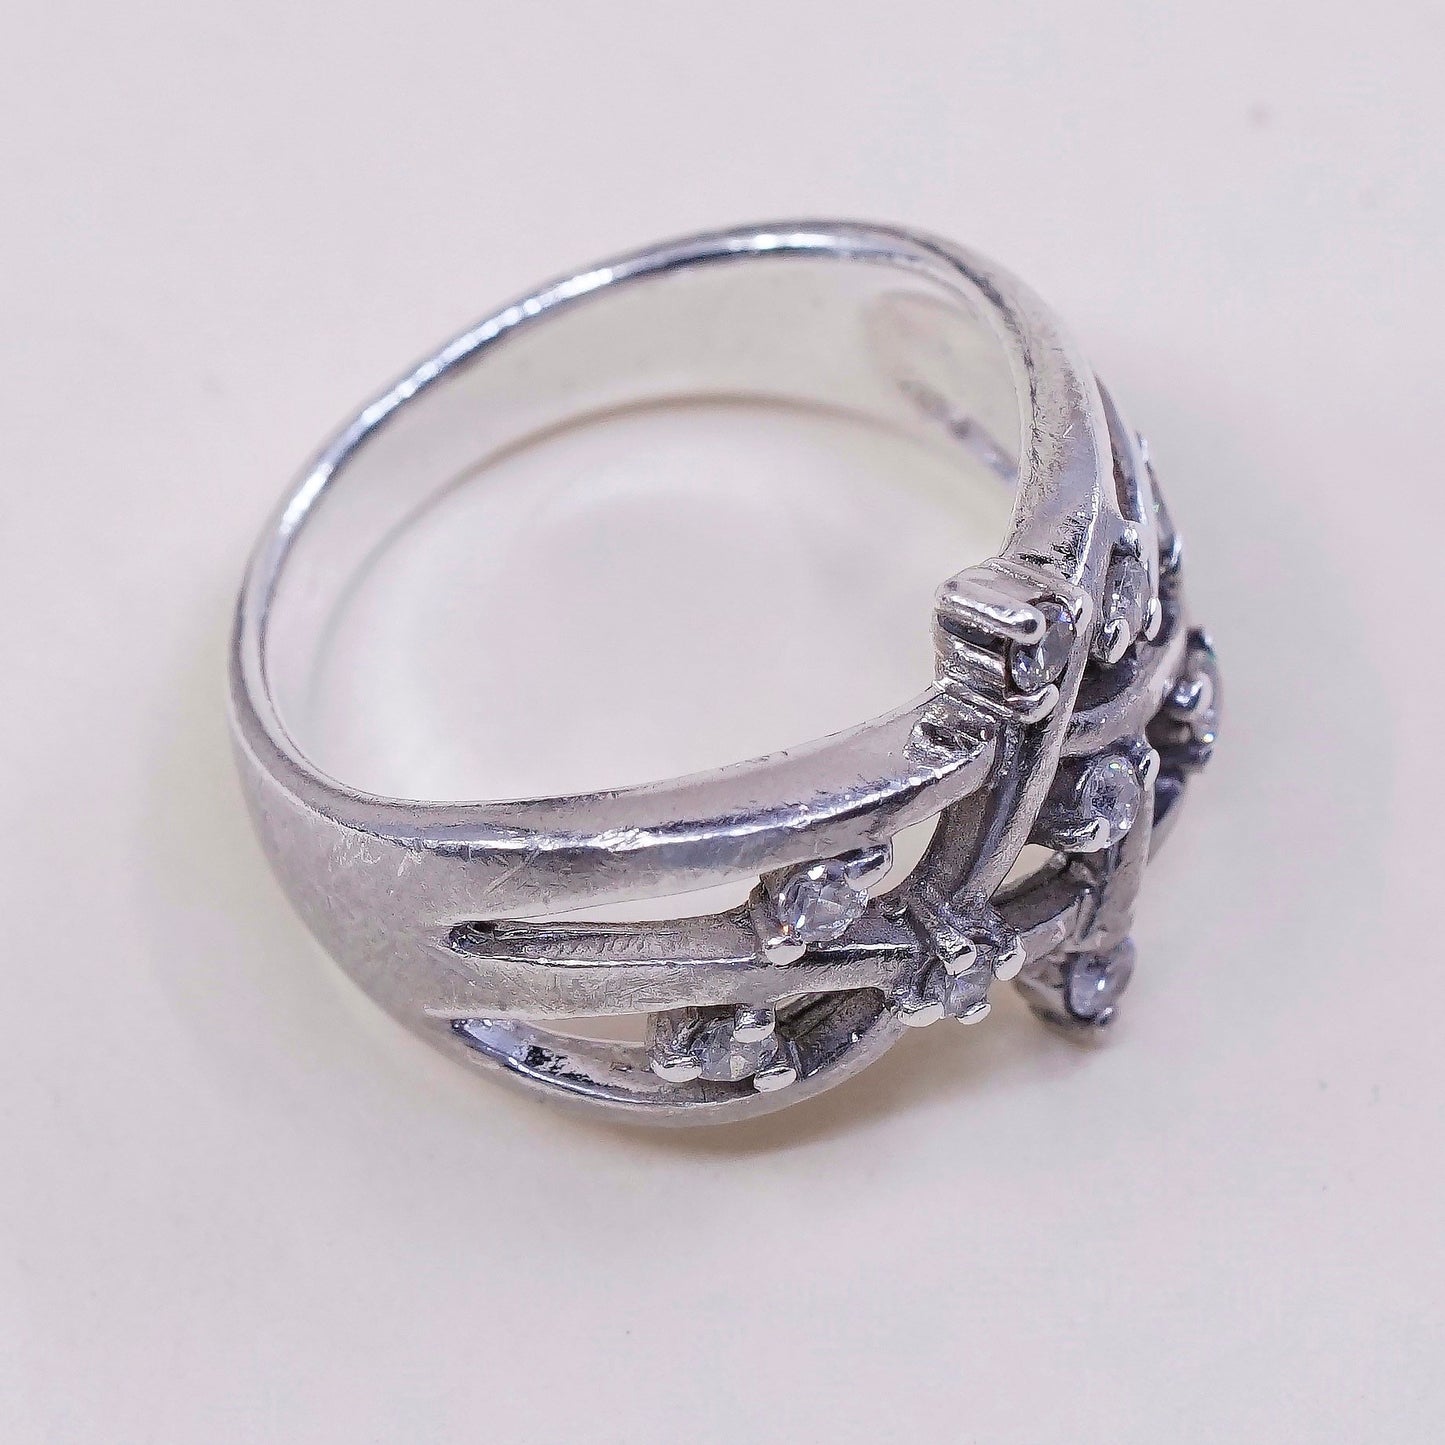 sz 7, vtg Sterling silver 925 ring, statement band with round CZ and filigree